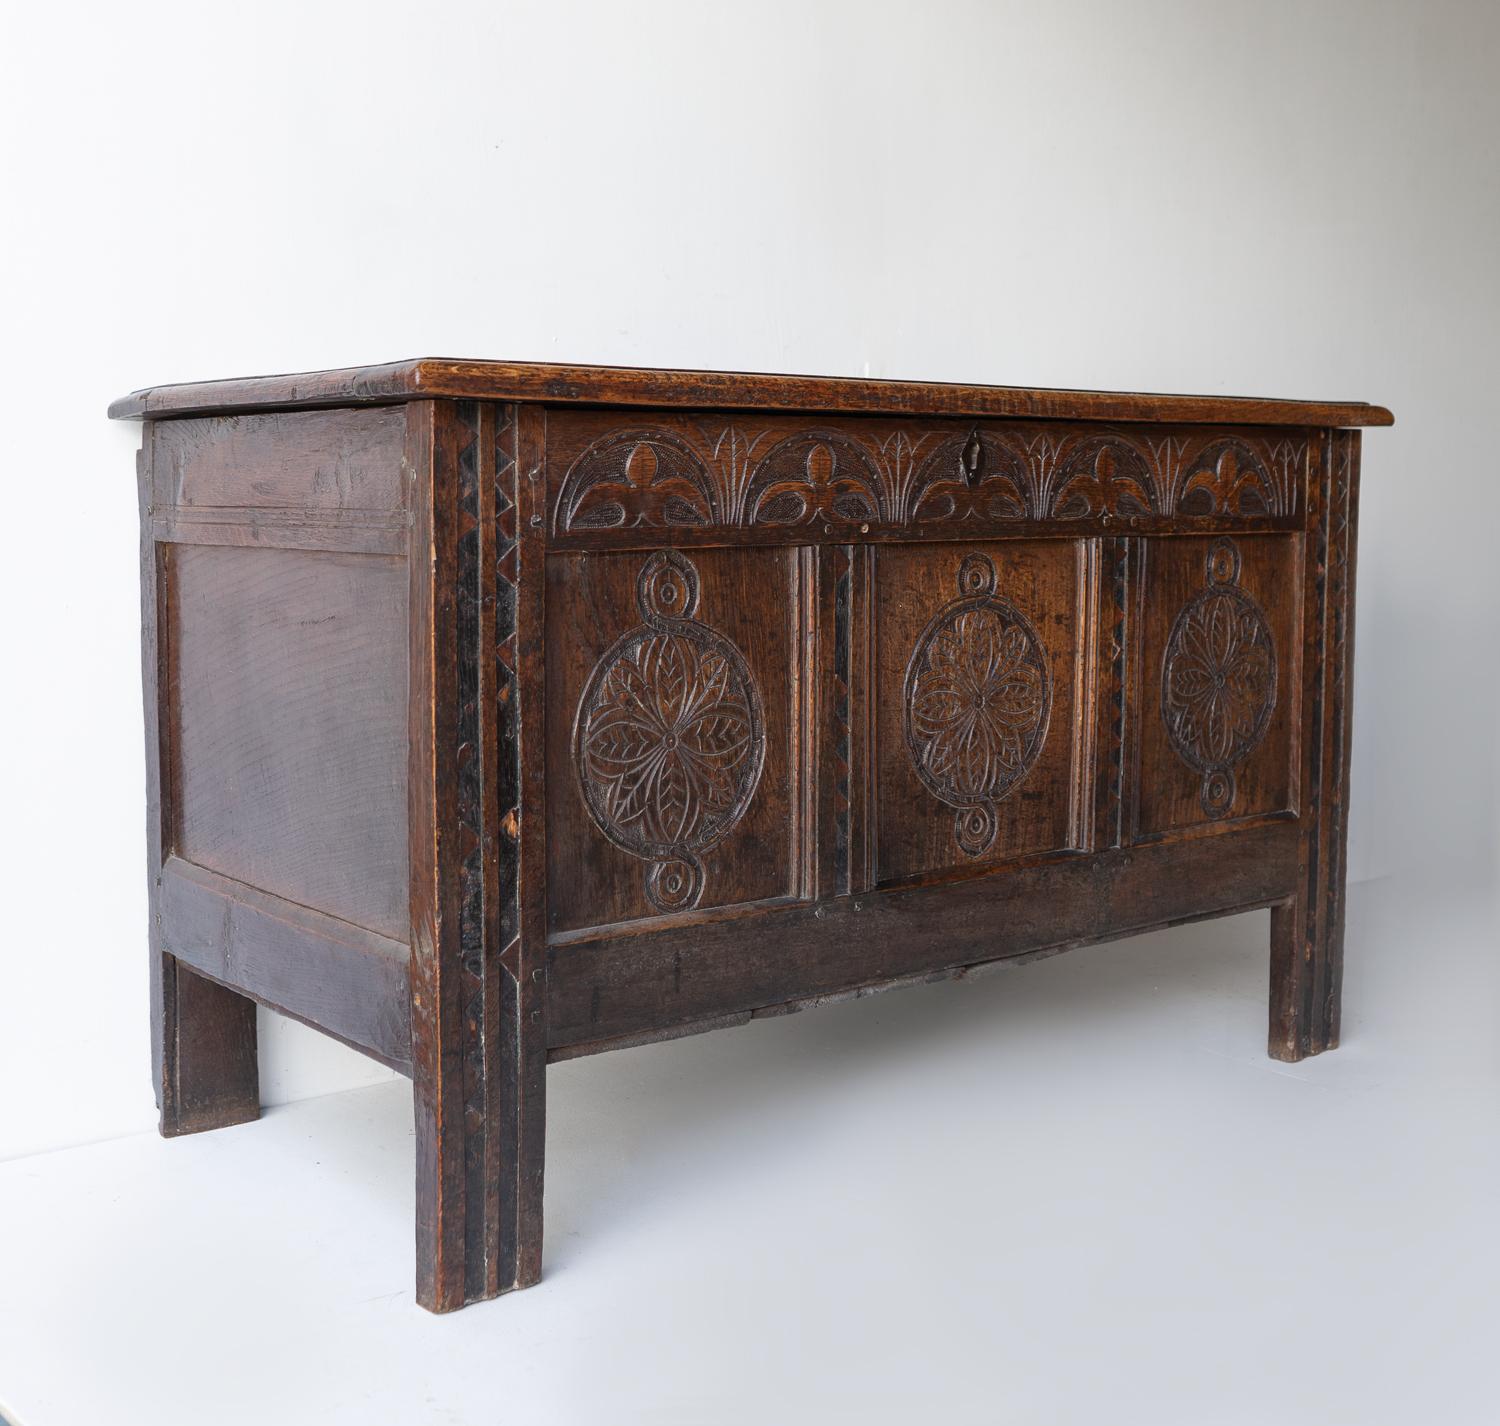 Wood Antique Charles II West Country Carved Oak Coffer 17th Century Blanket Box Chest For Sale